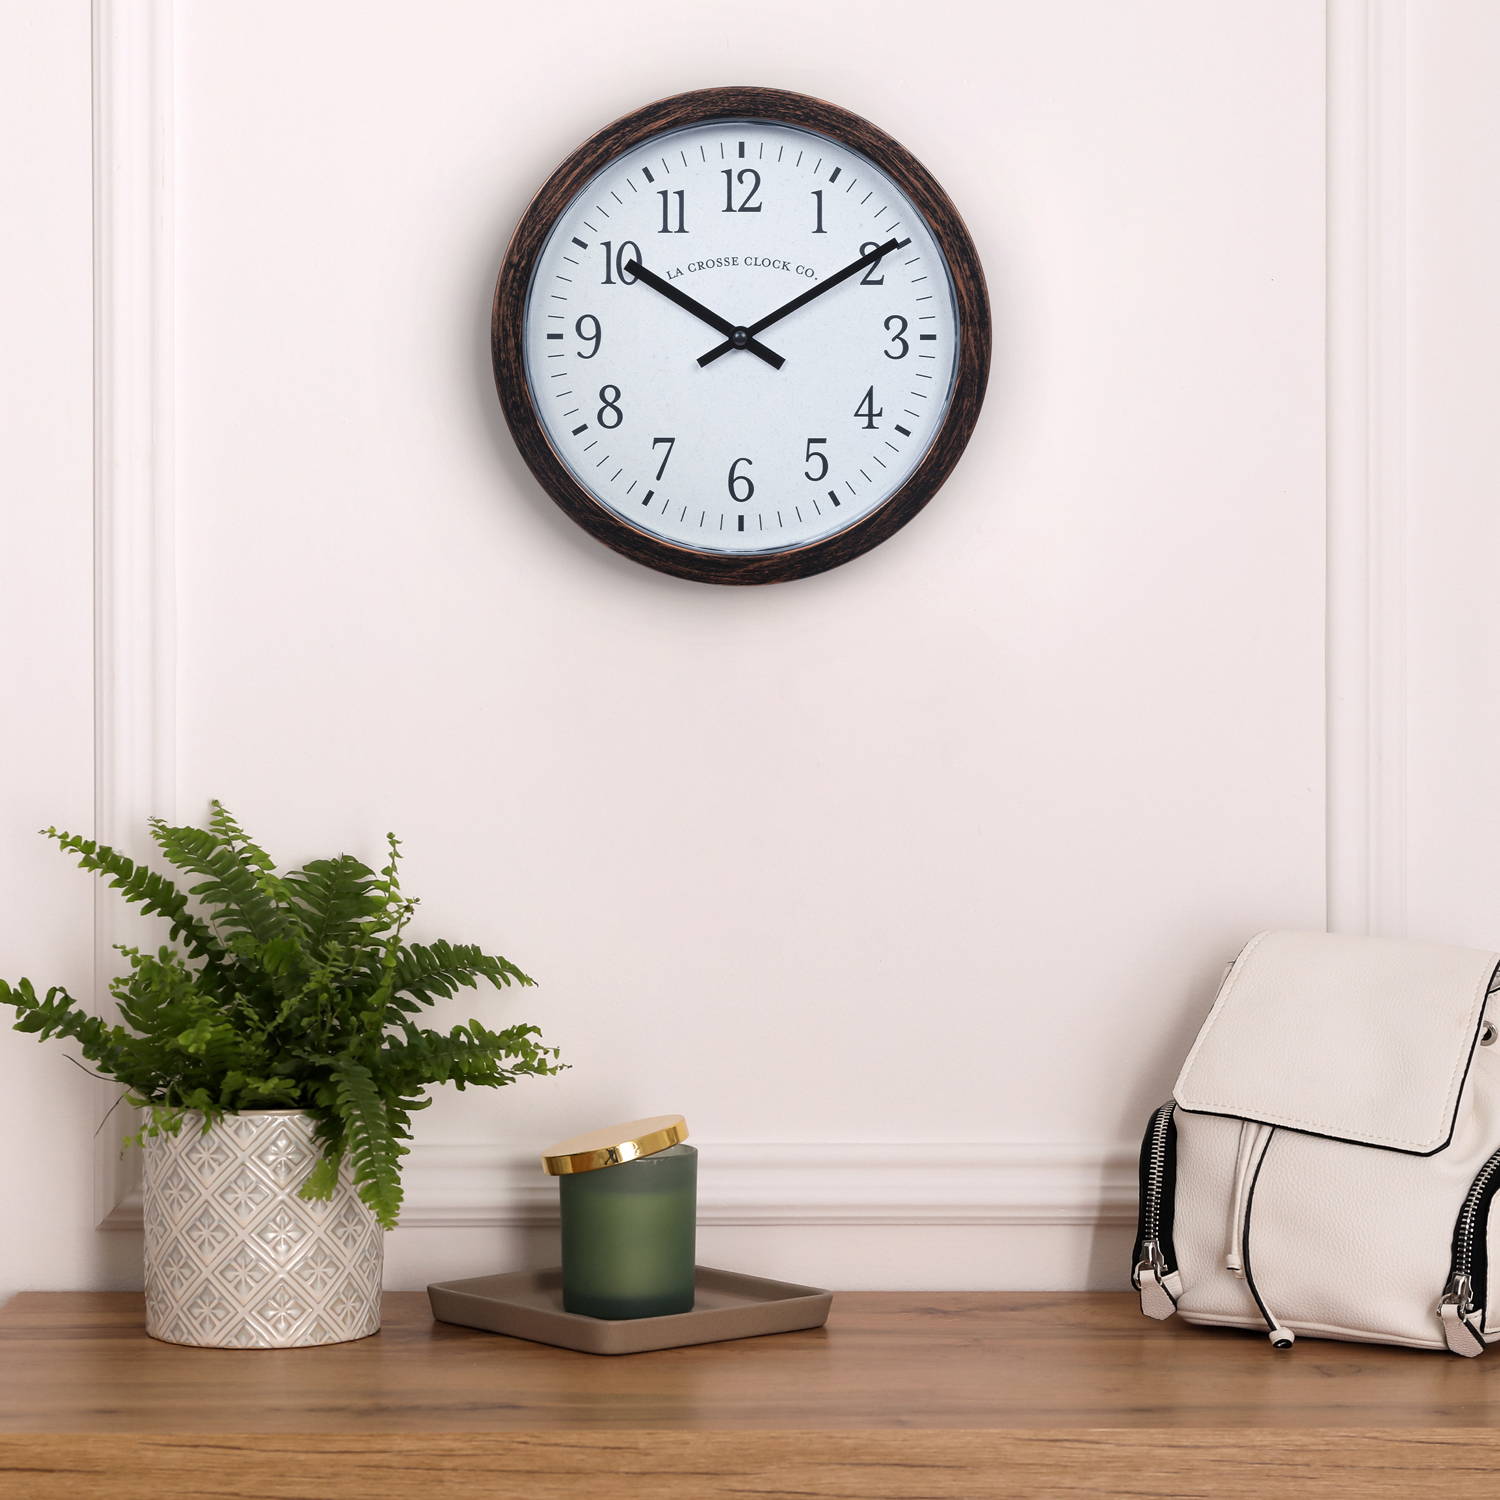 8 inch Wall Clock with hidden compartment